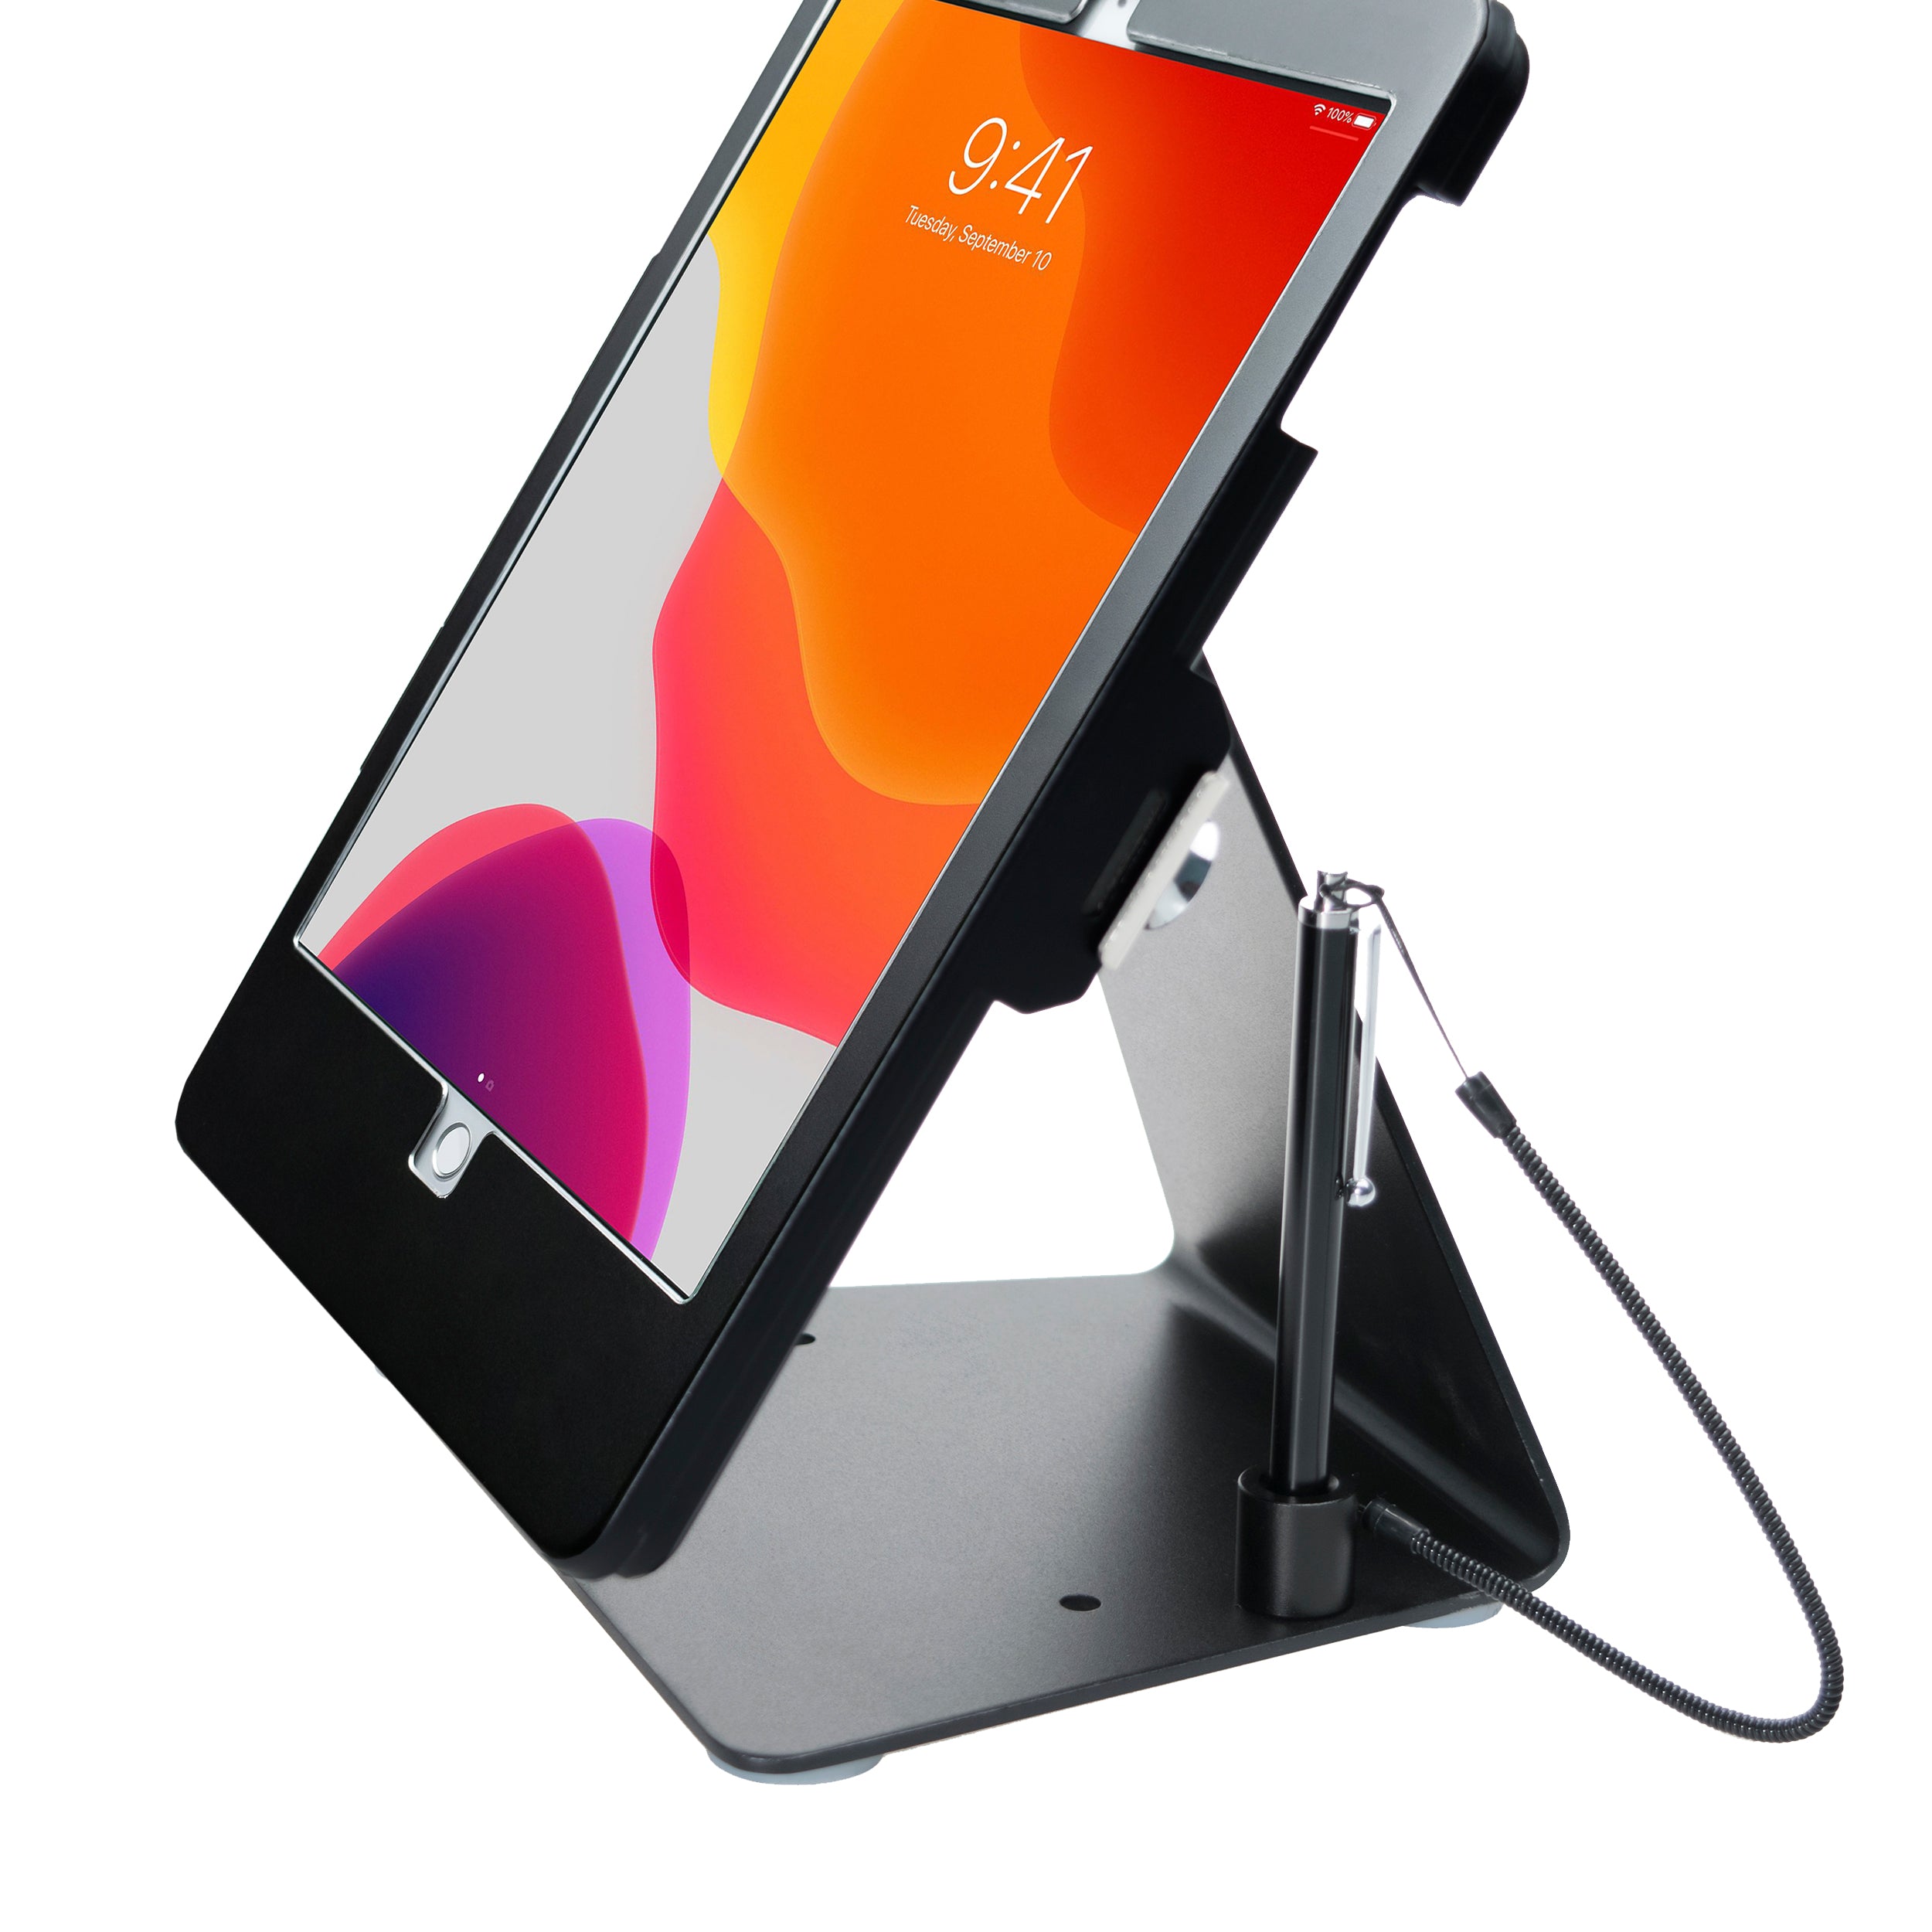 Desktop Anti-Theft Stand for iPad Air 3 (2019), iPad Pro 10.5 and 10.2-inch iPad (7th/ 8th/ 9th Gen) Black